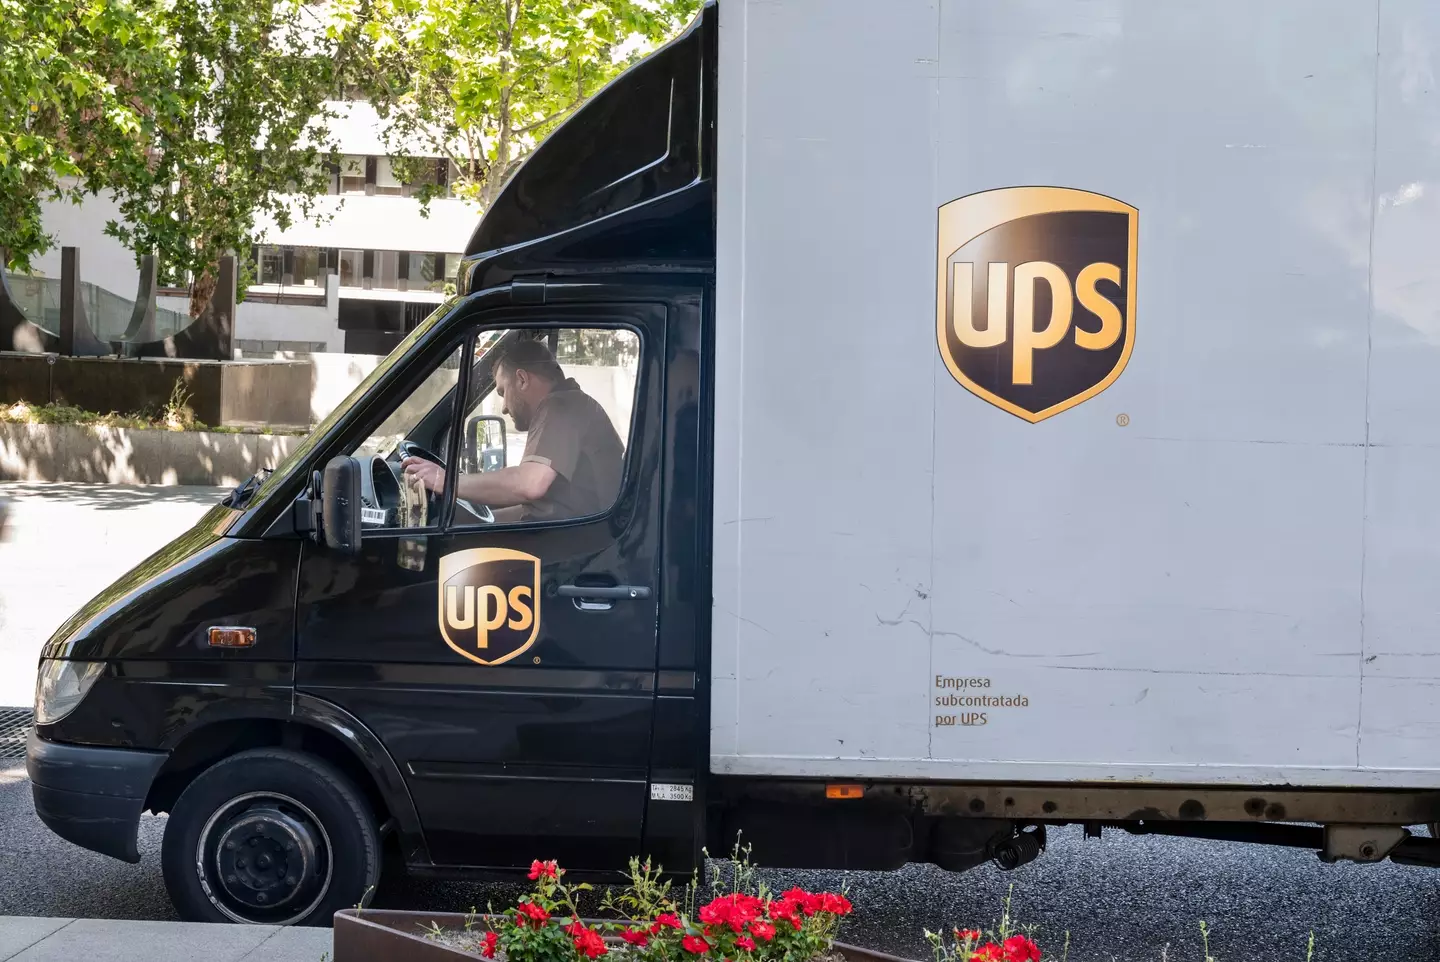 UPS drivers received a pay rise through union negotiation.